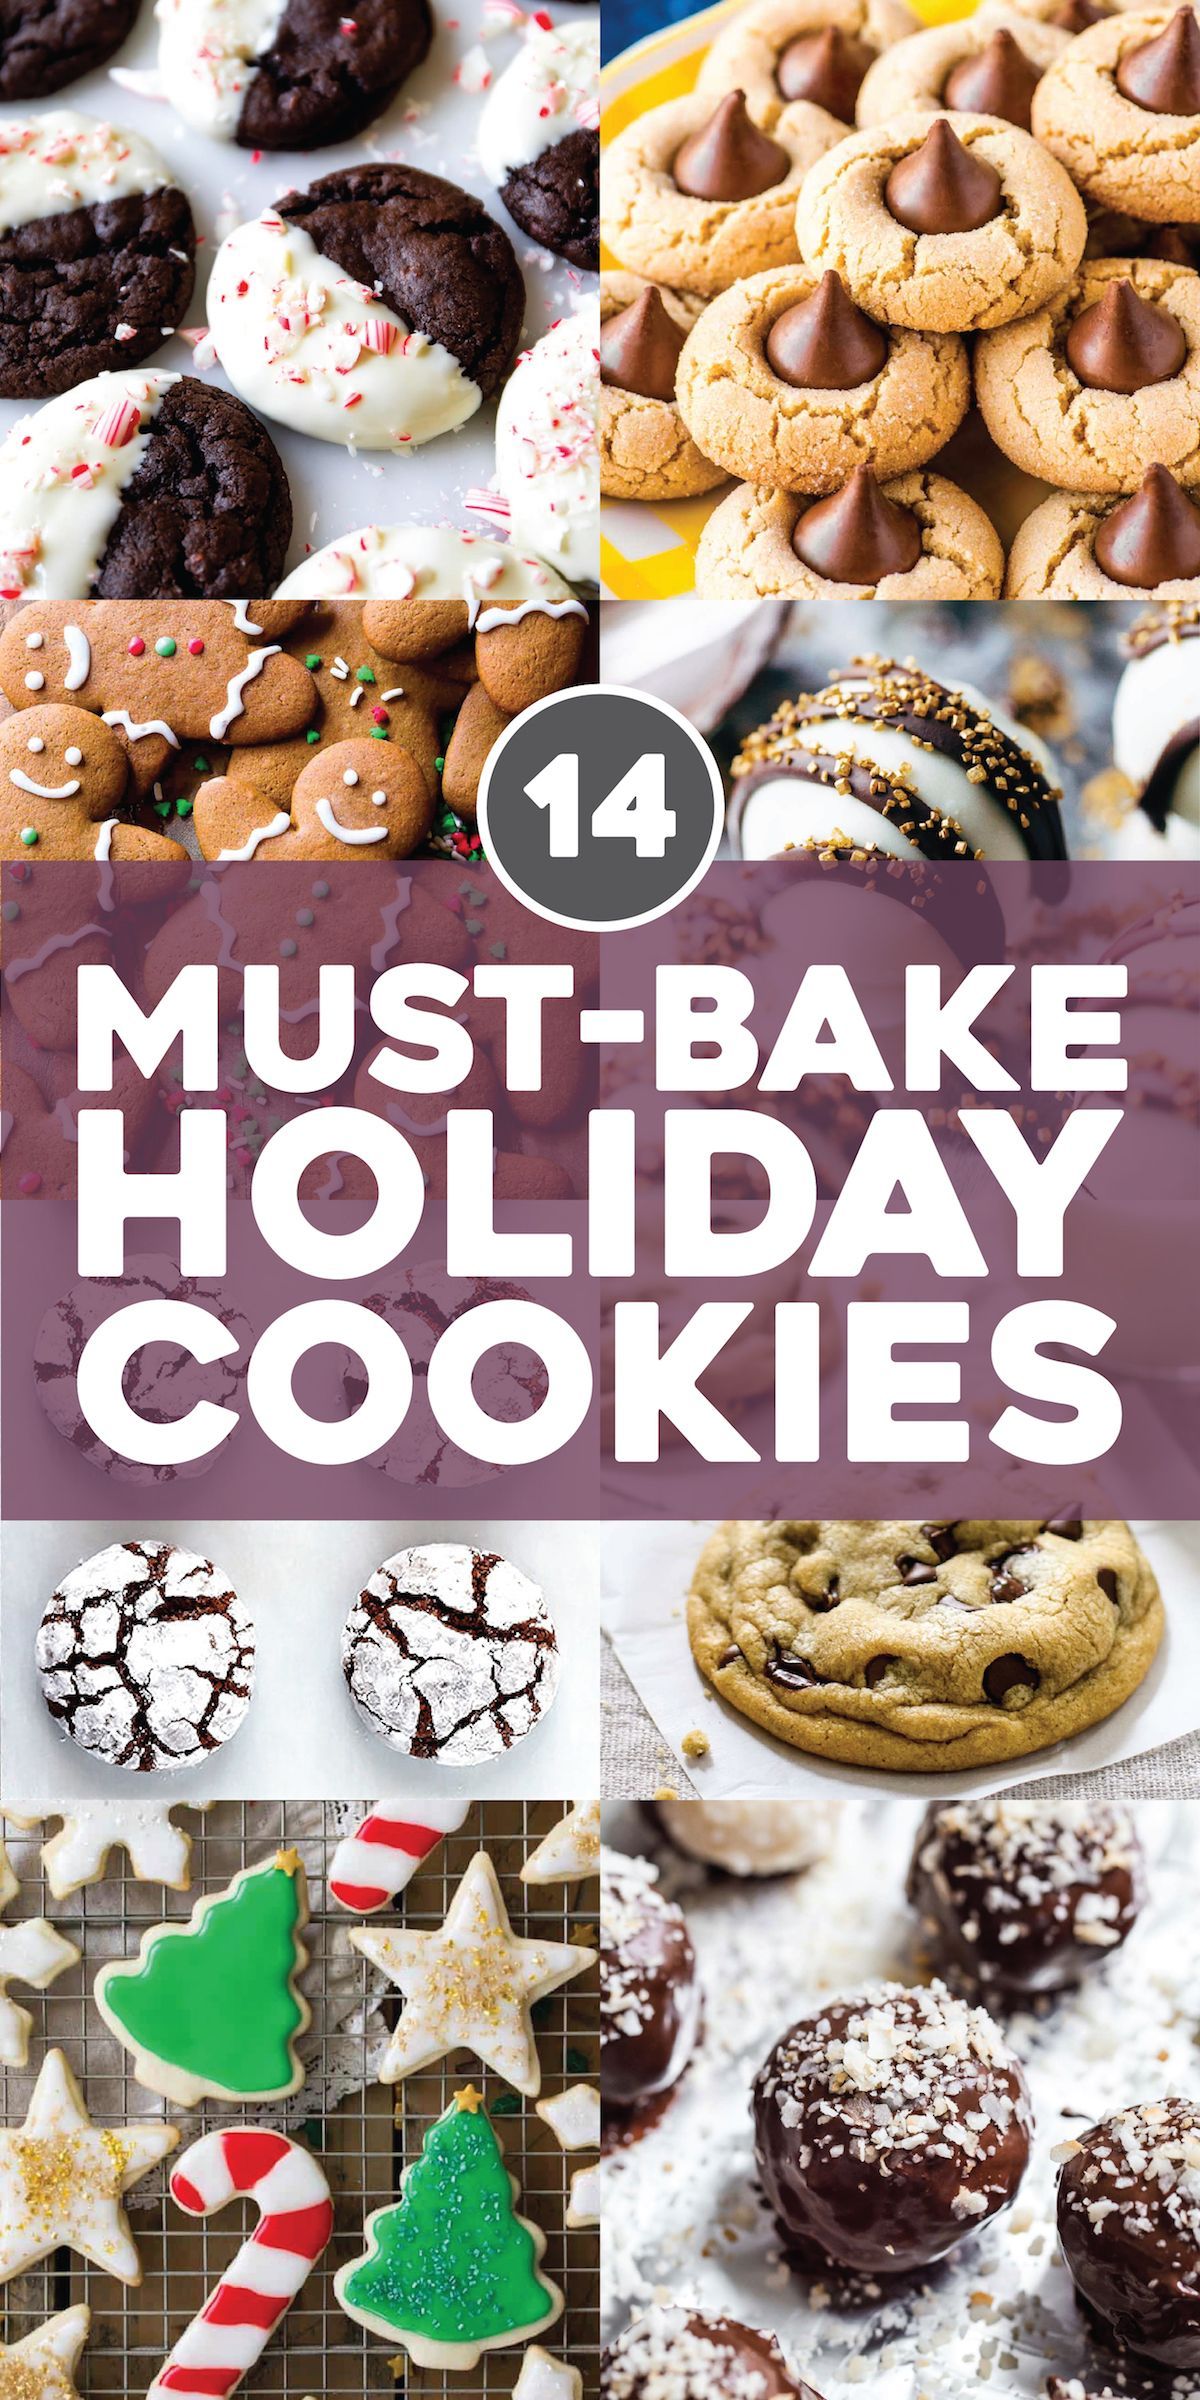 14 Must-Bake Holiday Cookie Recipes - Pinch of Yum -   17 holiday Cookies recipes ideas